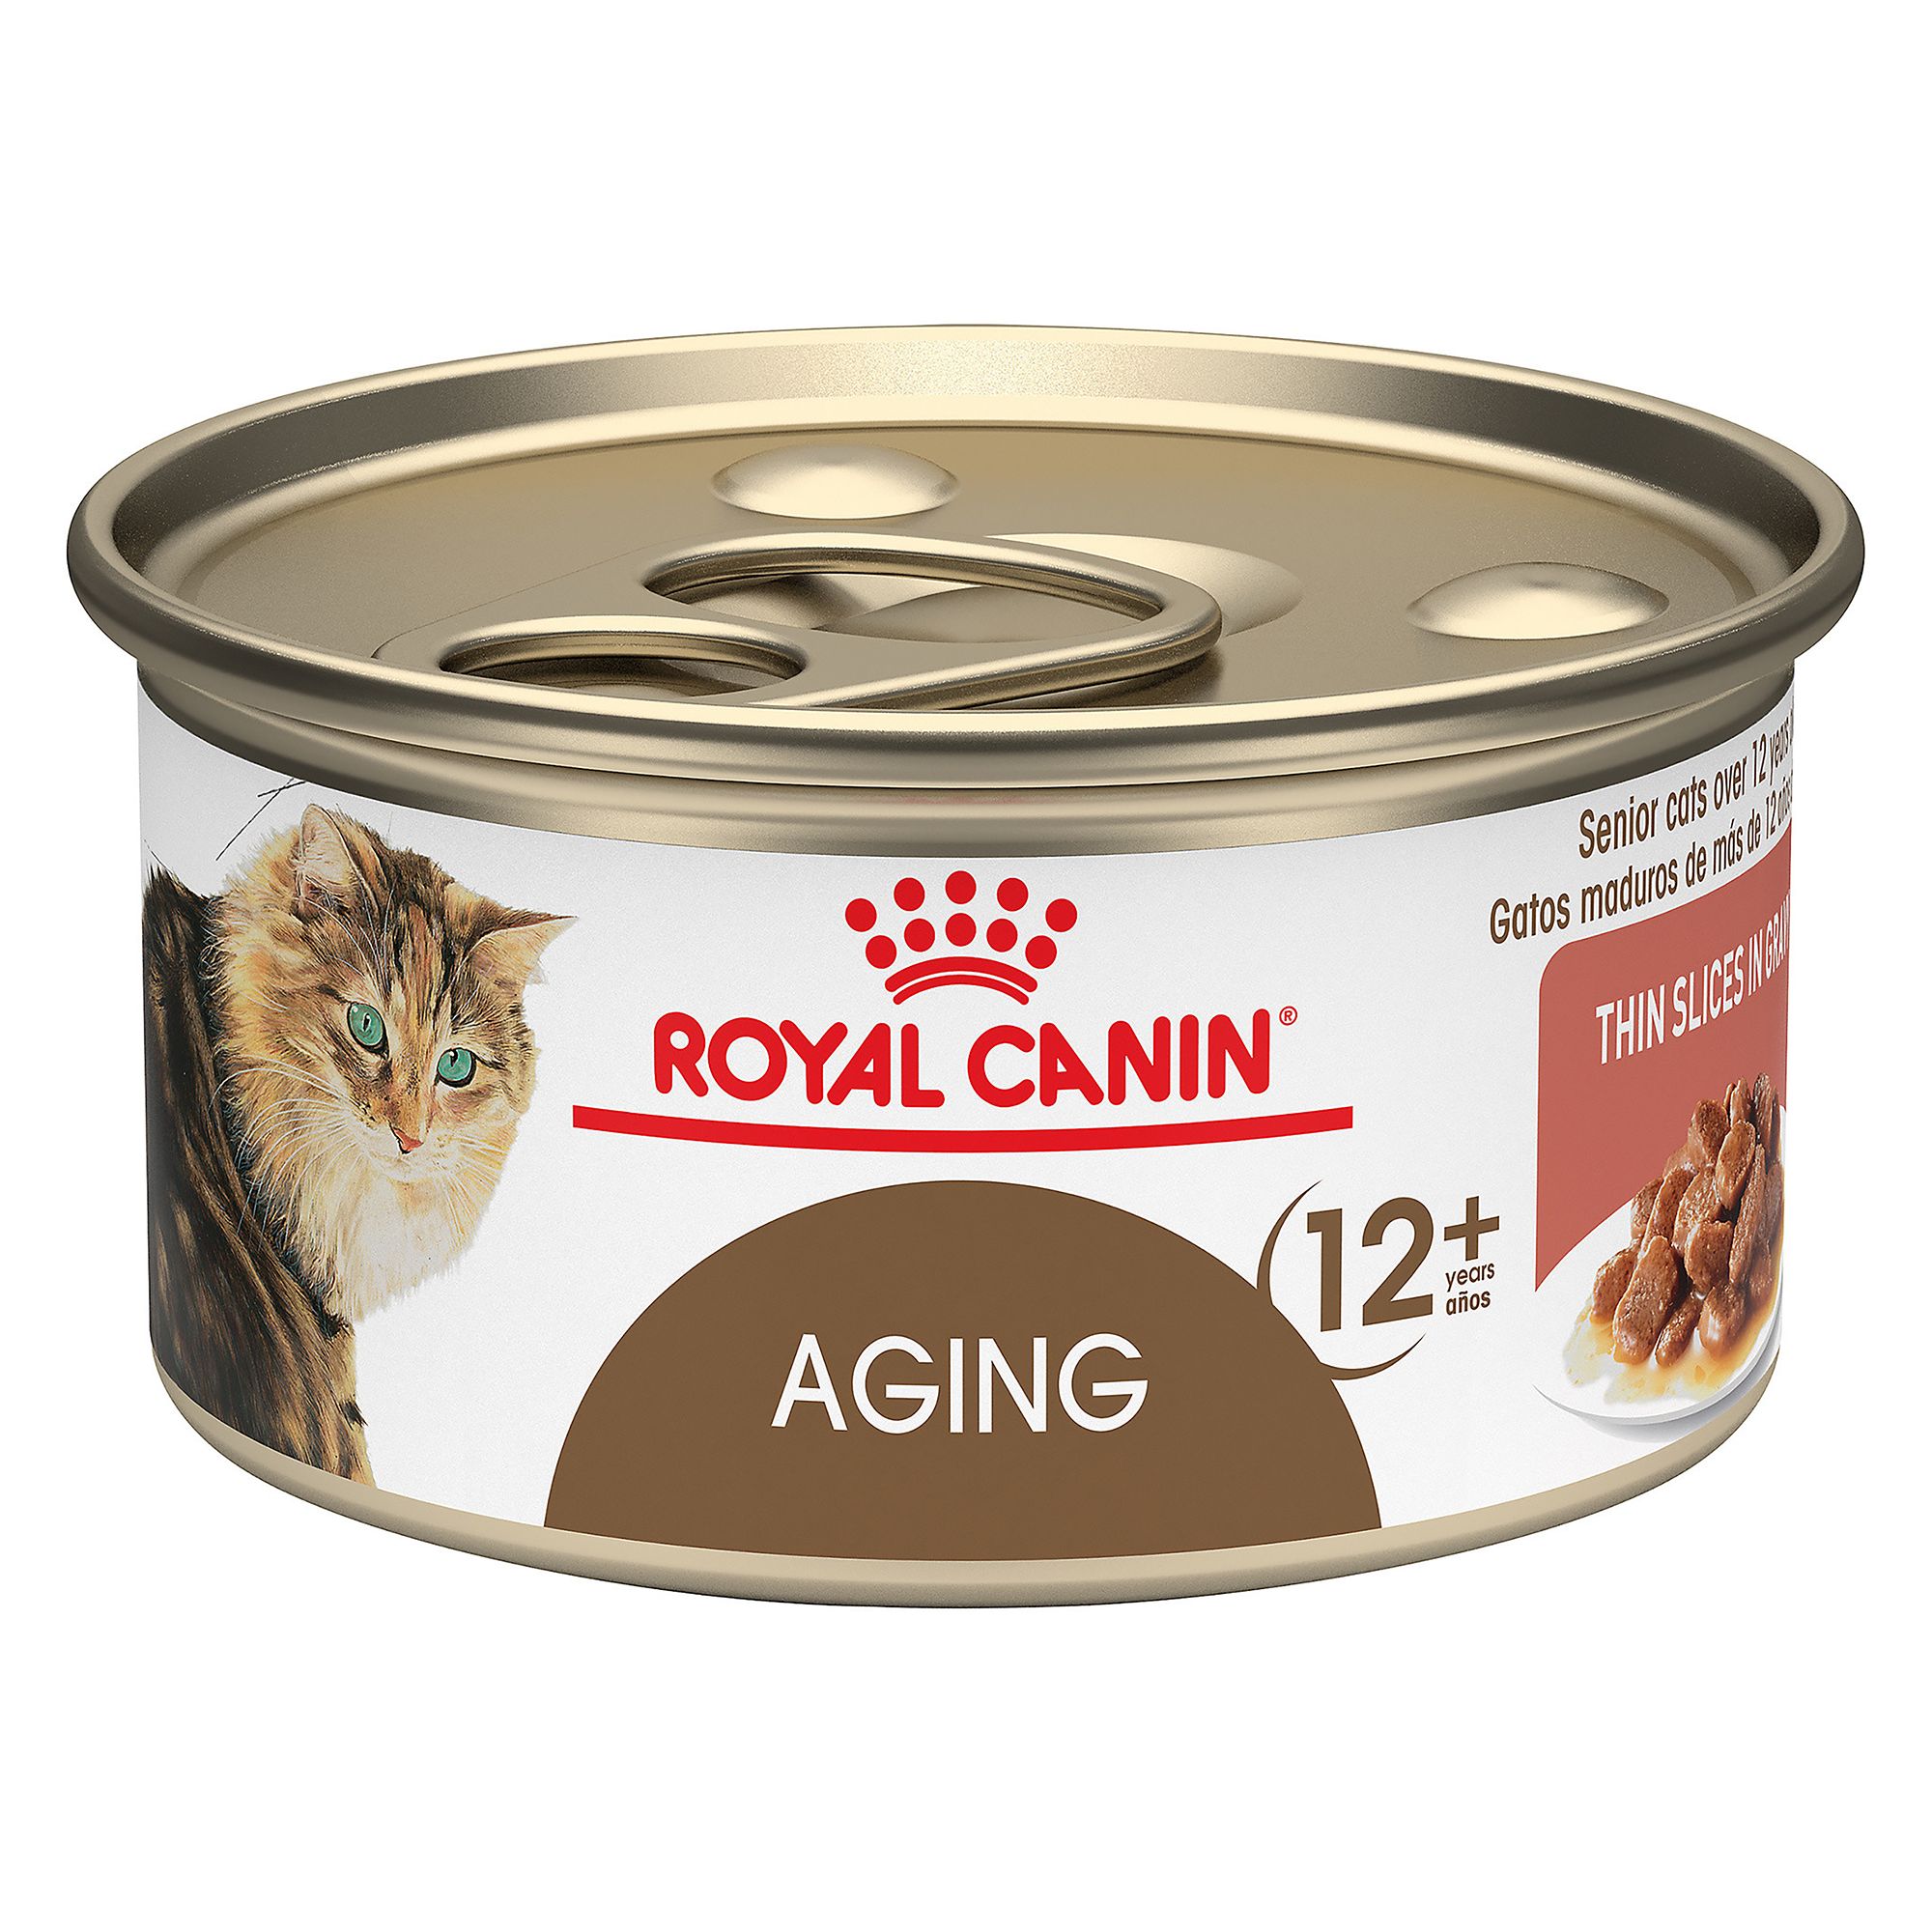 Royal Canin Canned Cat Food Feeding Guide